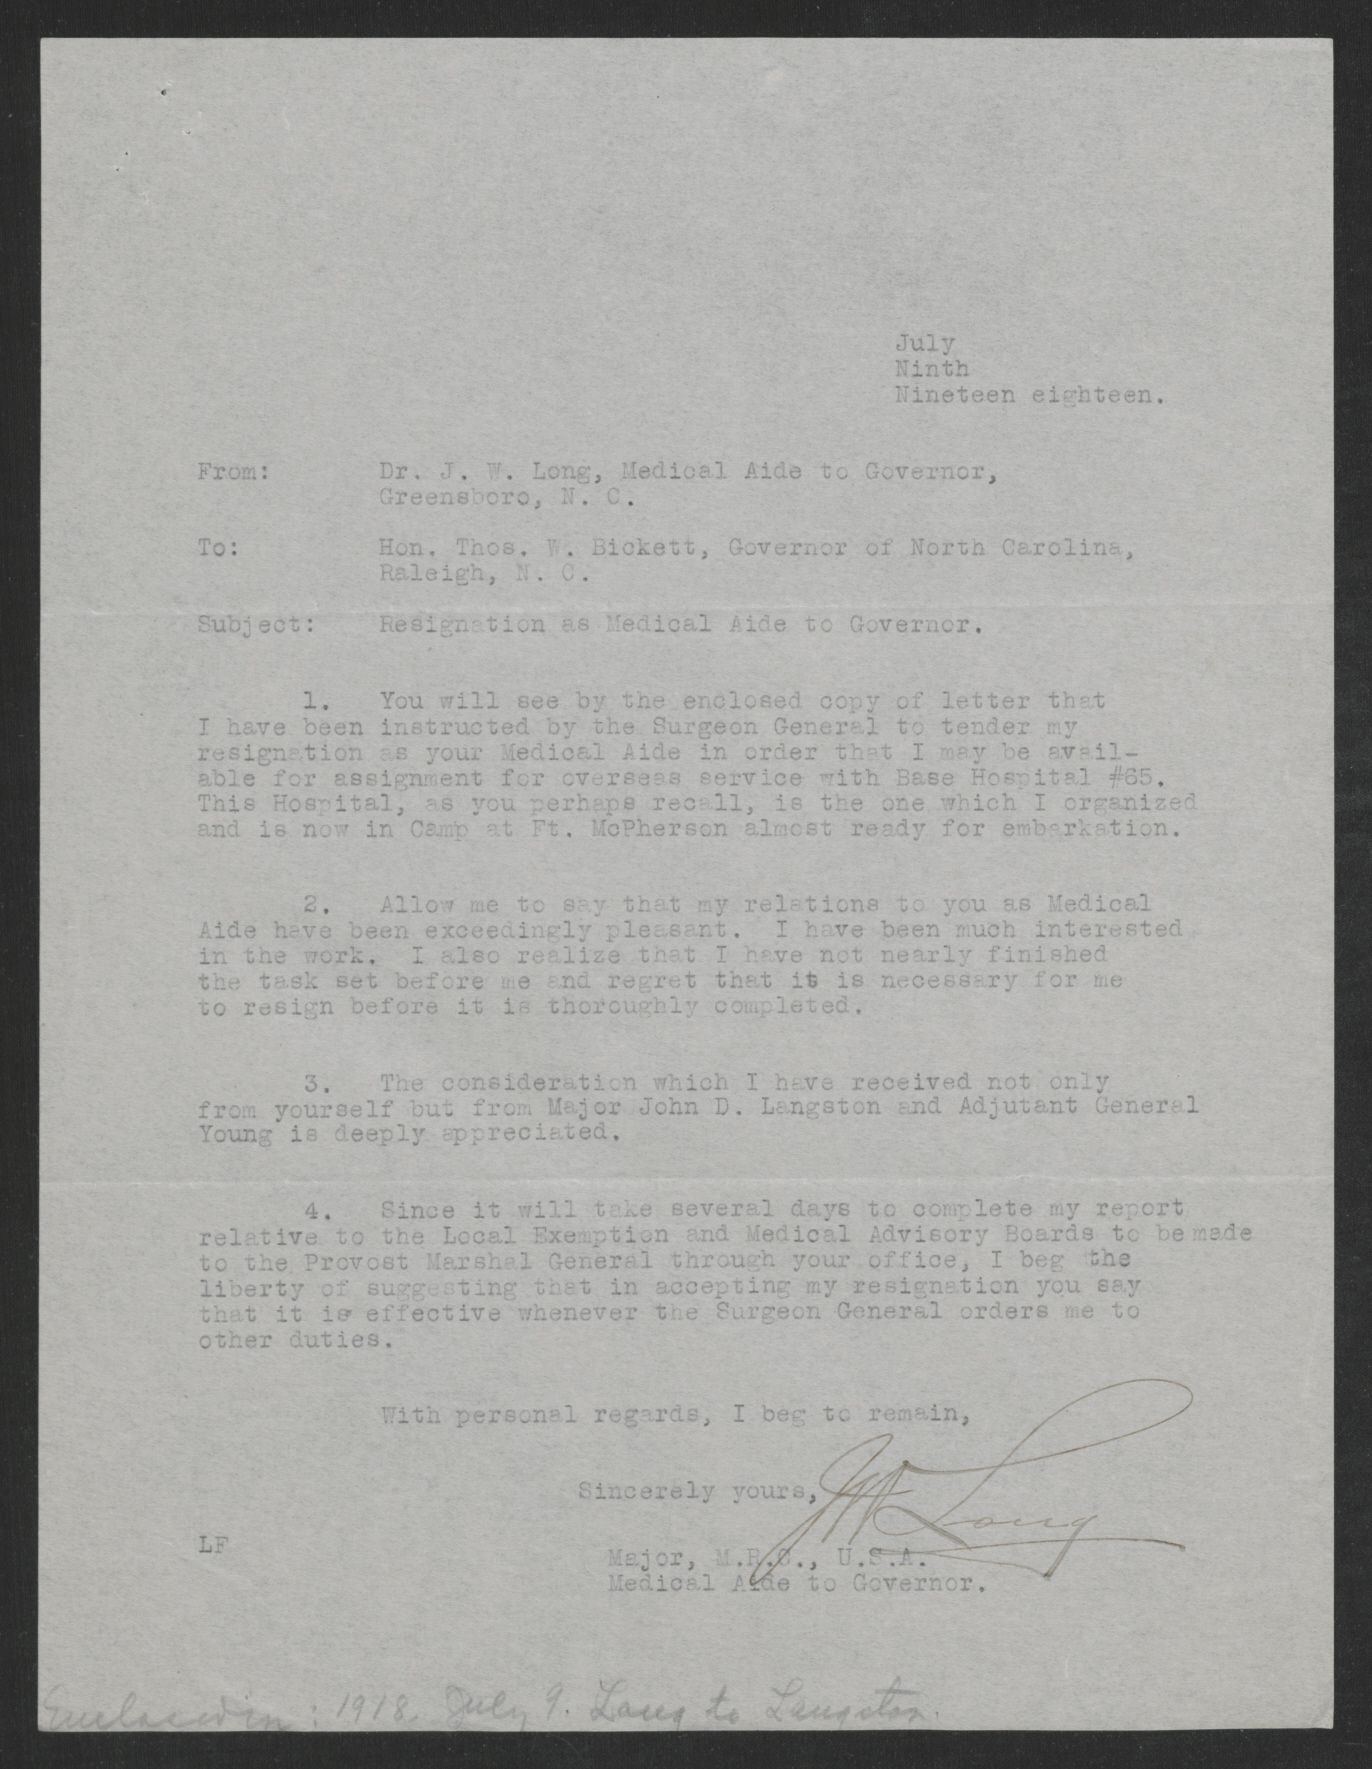 Letter from John W. Long to Thomas W. Bickett, July 9, 1918